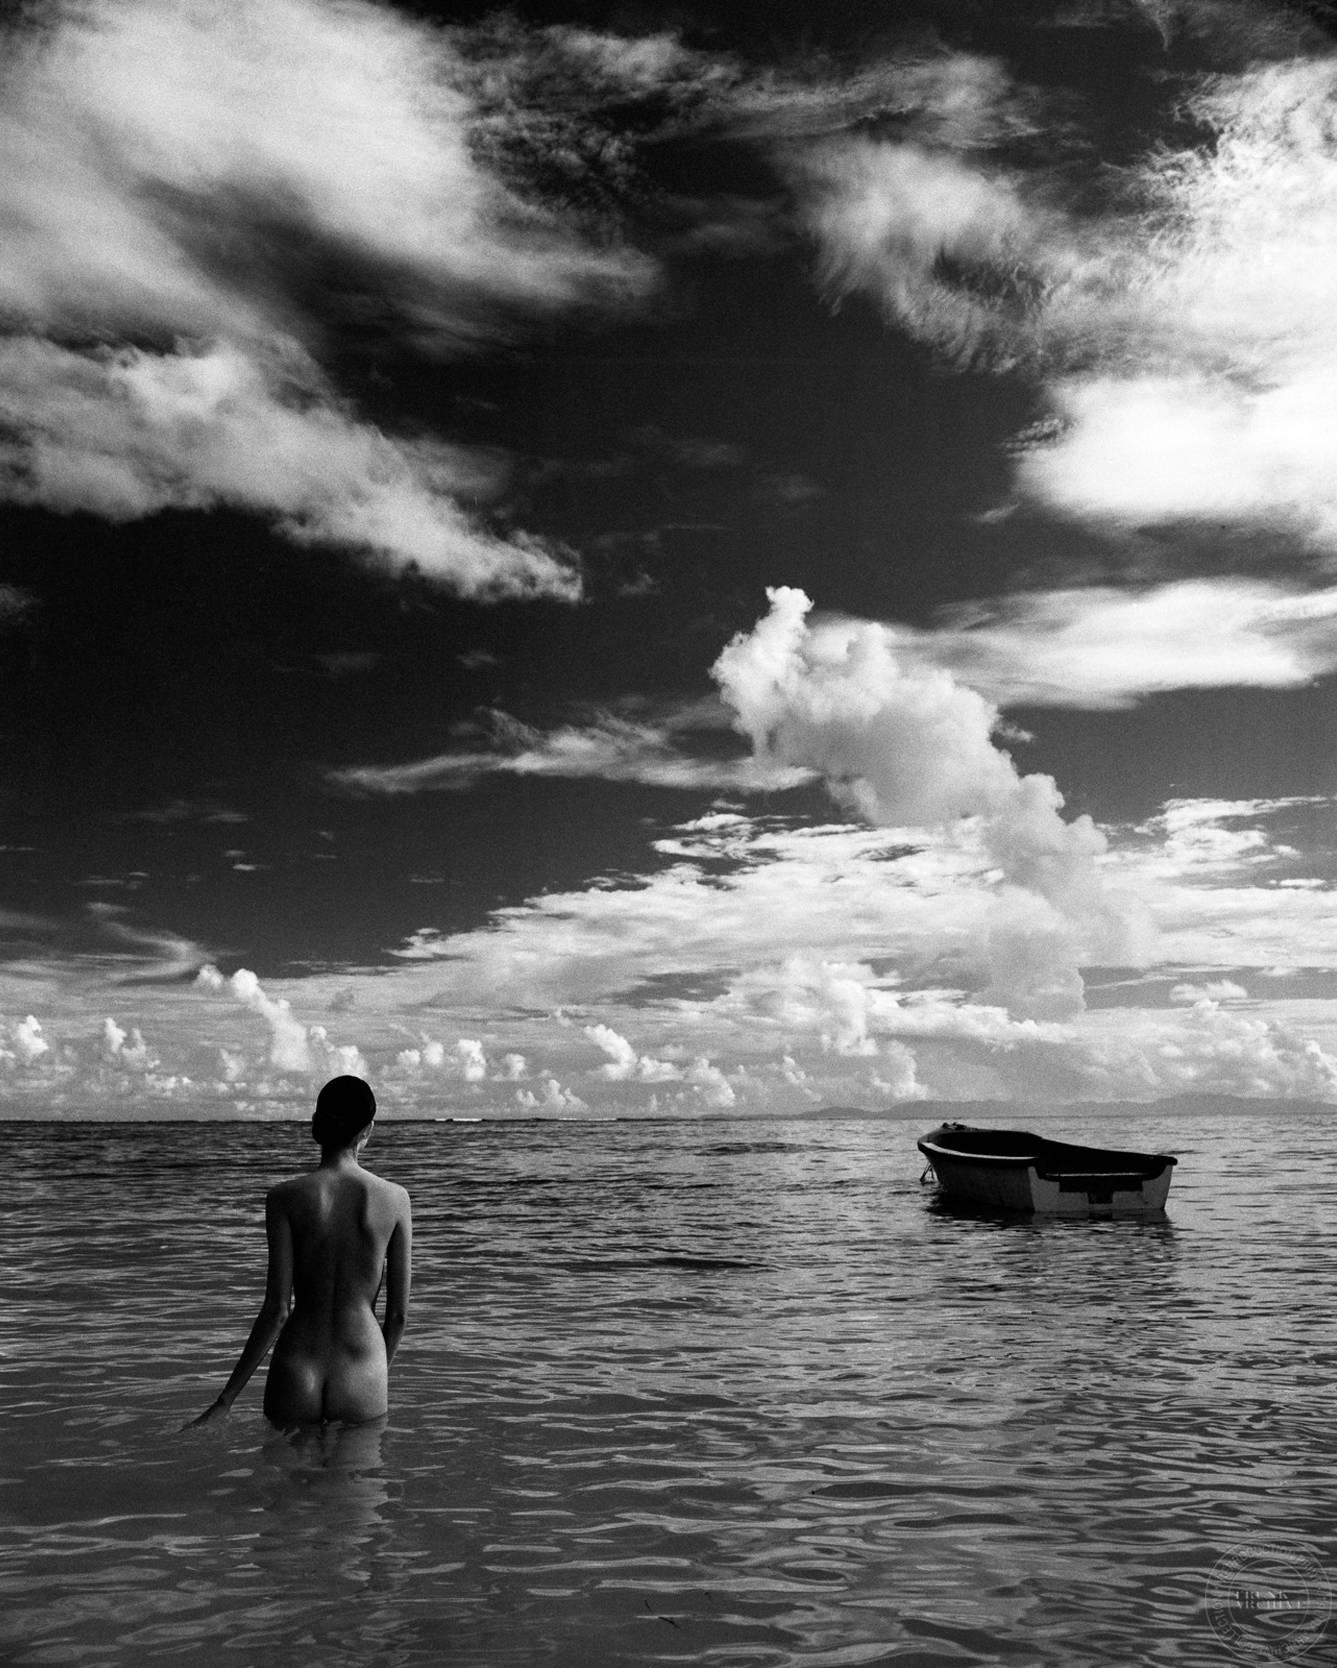 Patric Shaw Black and White Photograph - Nude (Woman in Water)